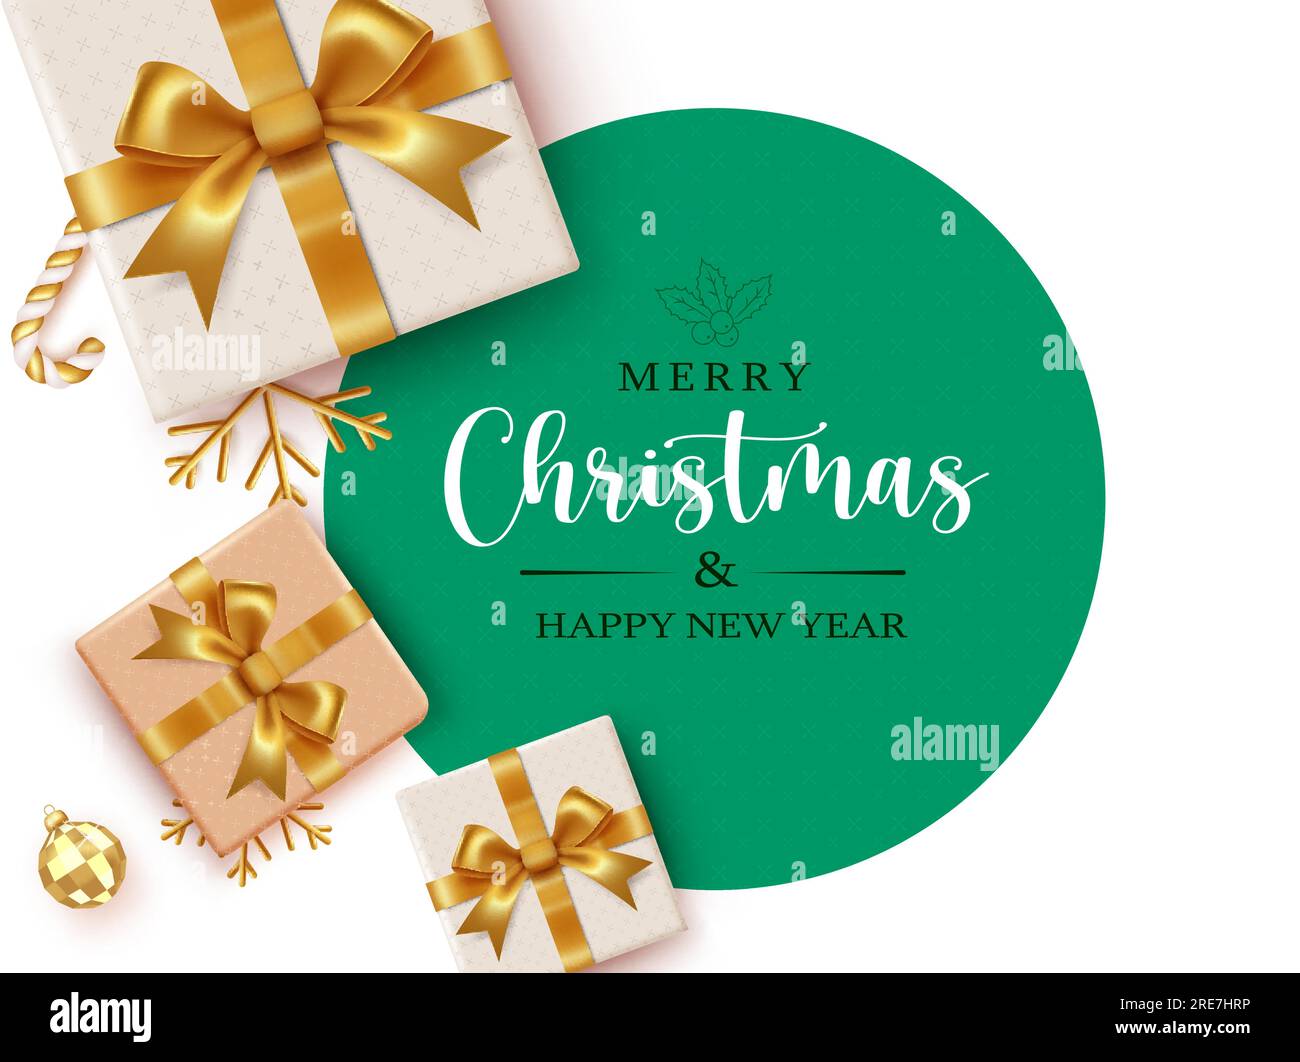 Merry christmas text vector template. Christmas greeting in green circle space for typography with gifts boxes surprise elements in elegant gold color Stock Vector